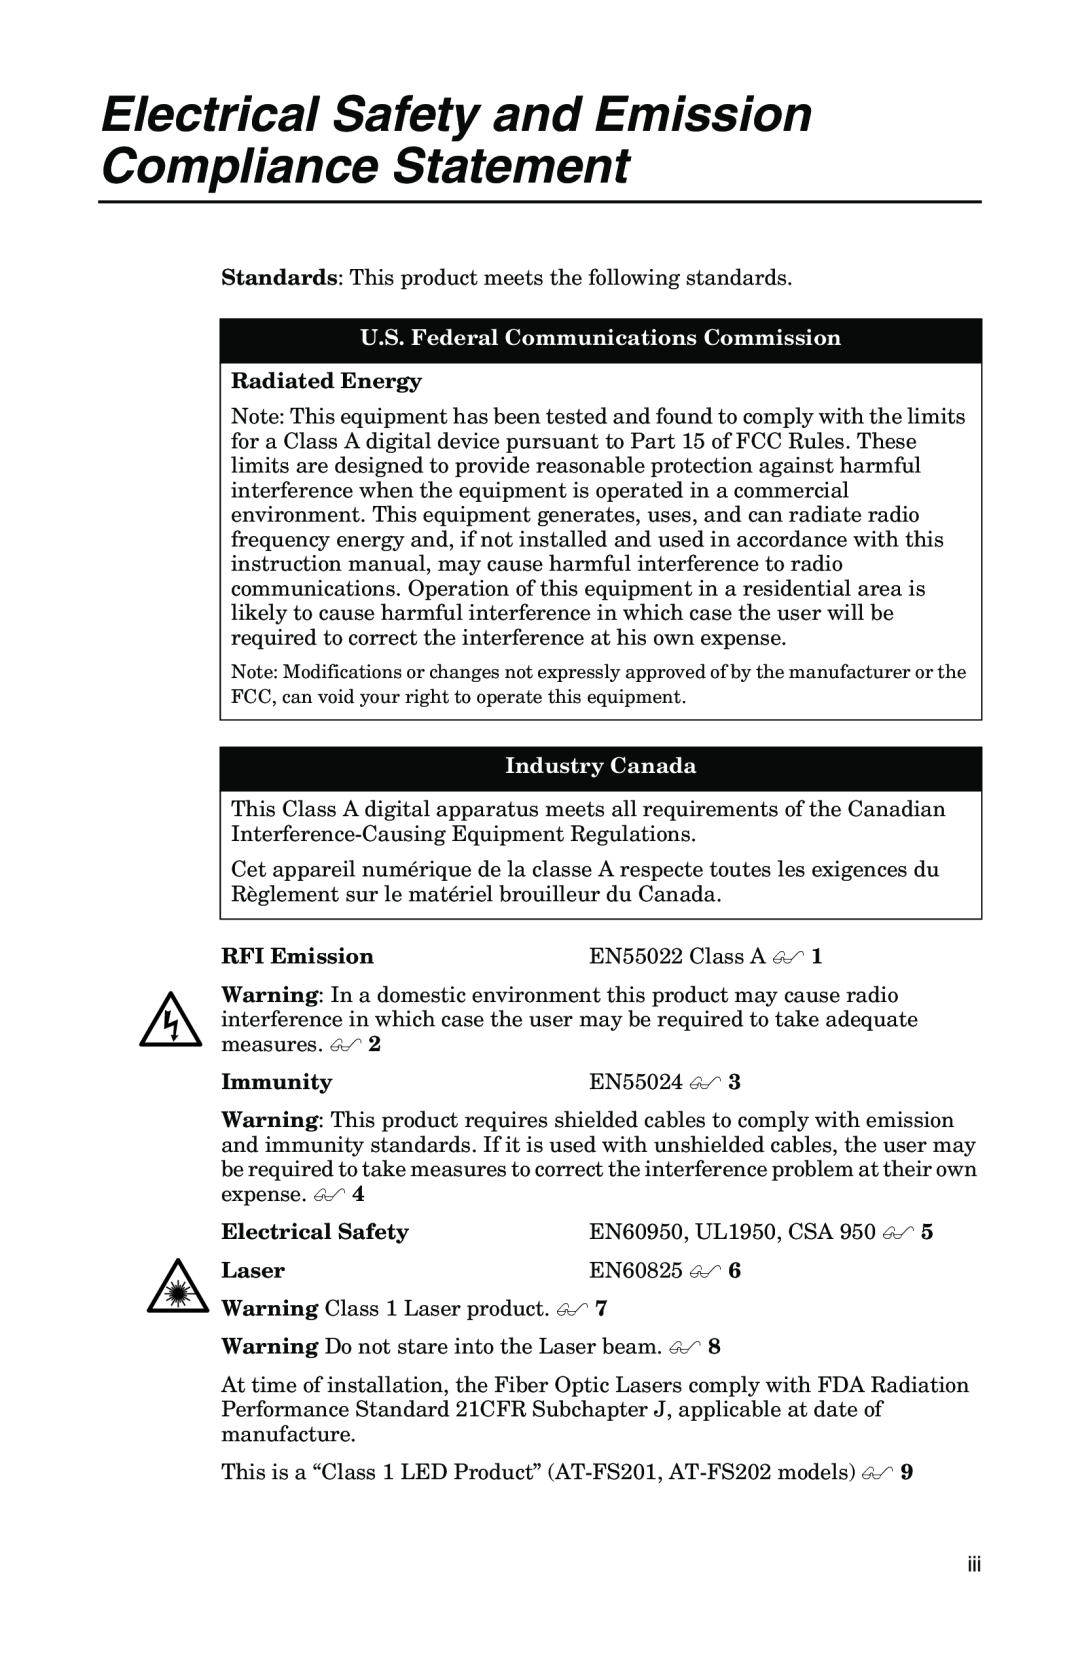 IBM AT-FS201 Electrical Safety and Emission Compliance Statement, U.S. Federal Communications Commission, Industry Canada 